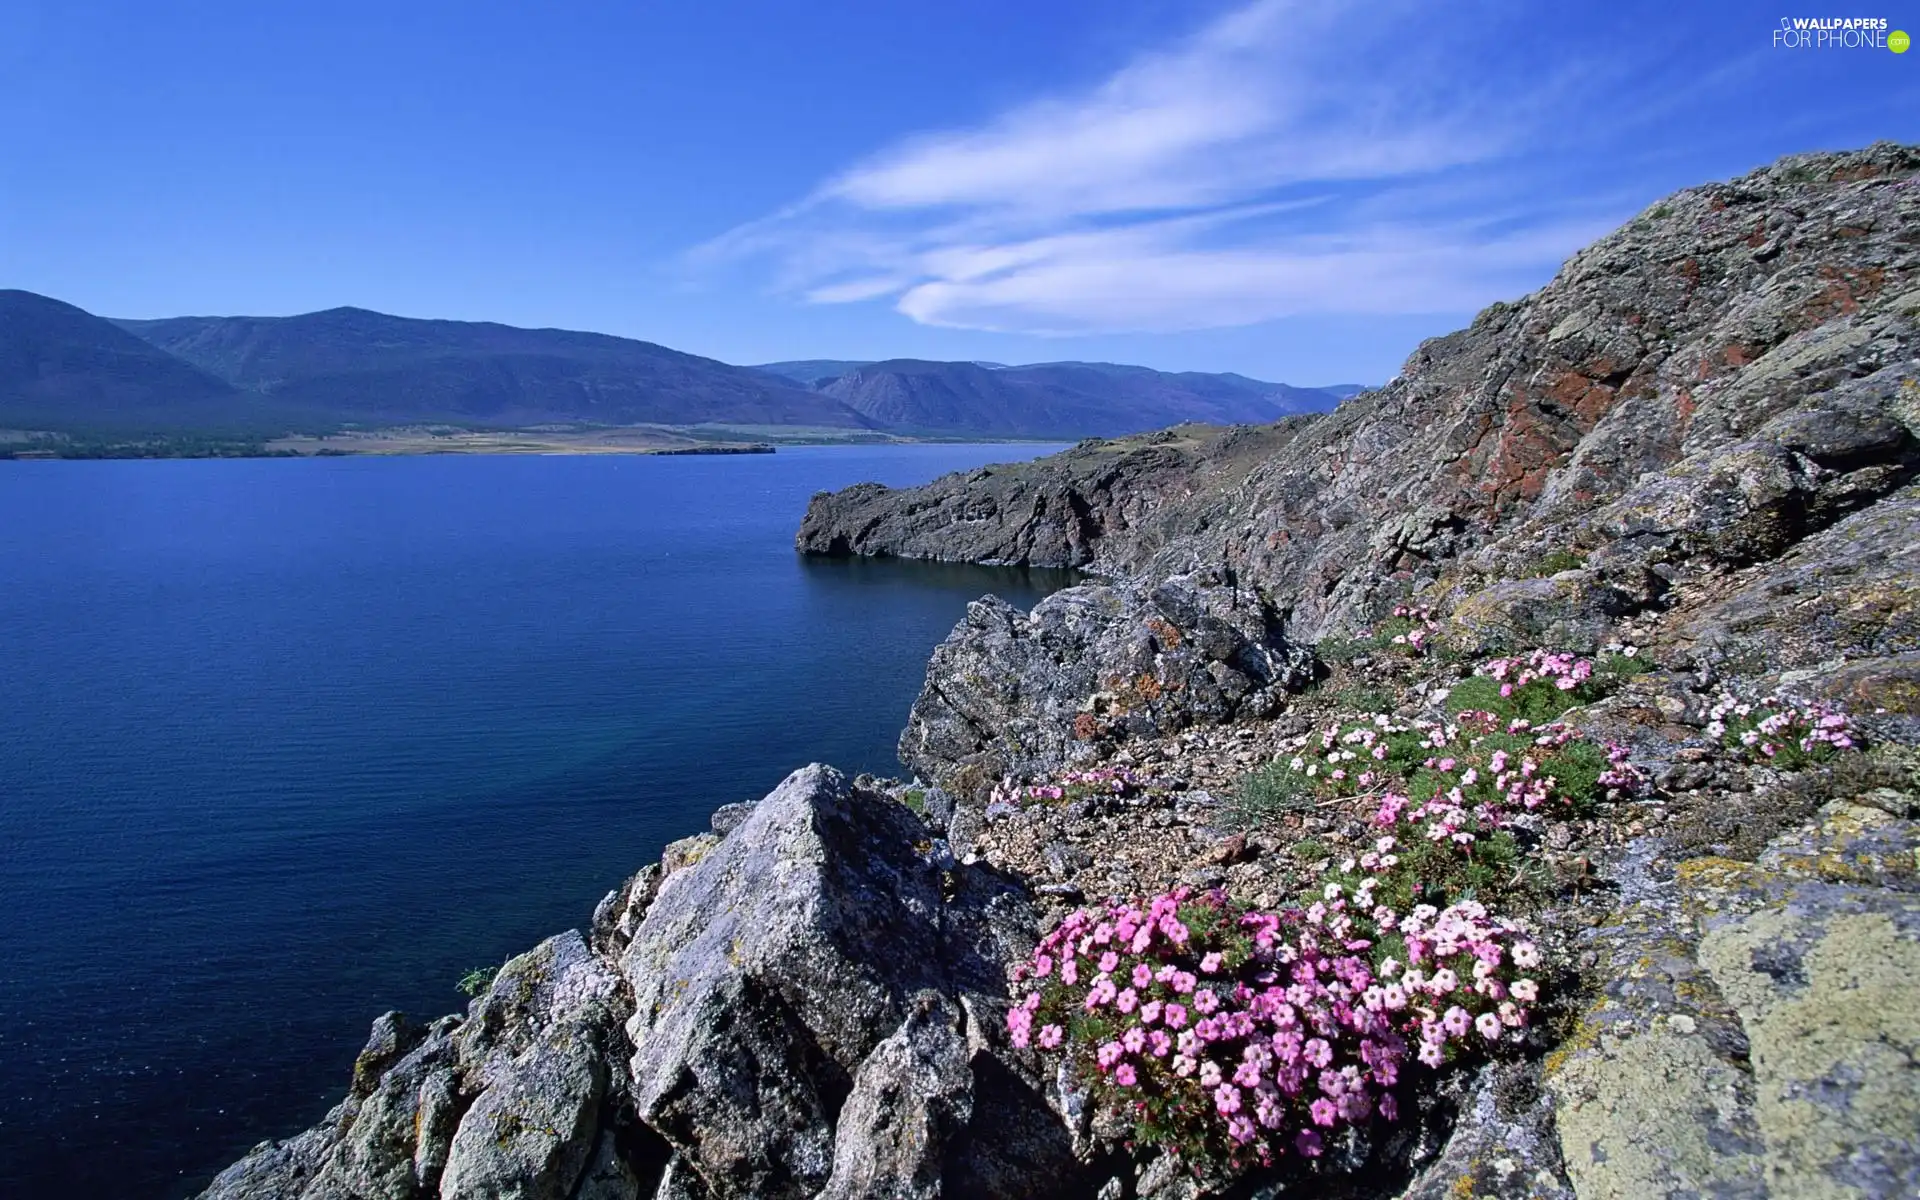 River, rocks, Flowers, Mountains